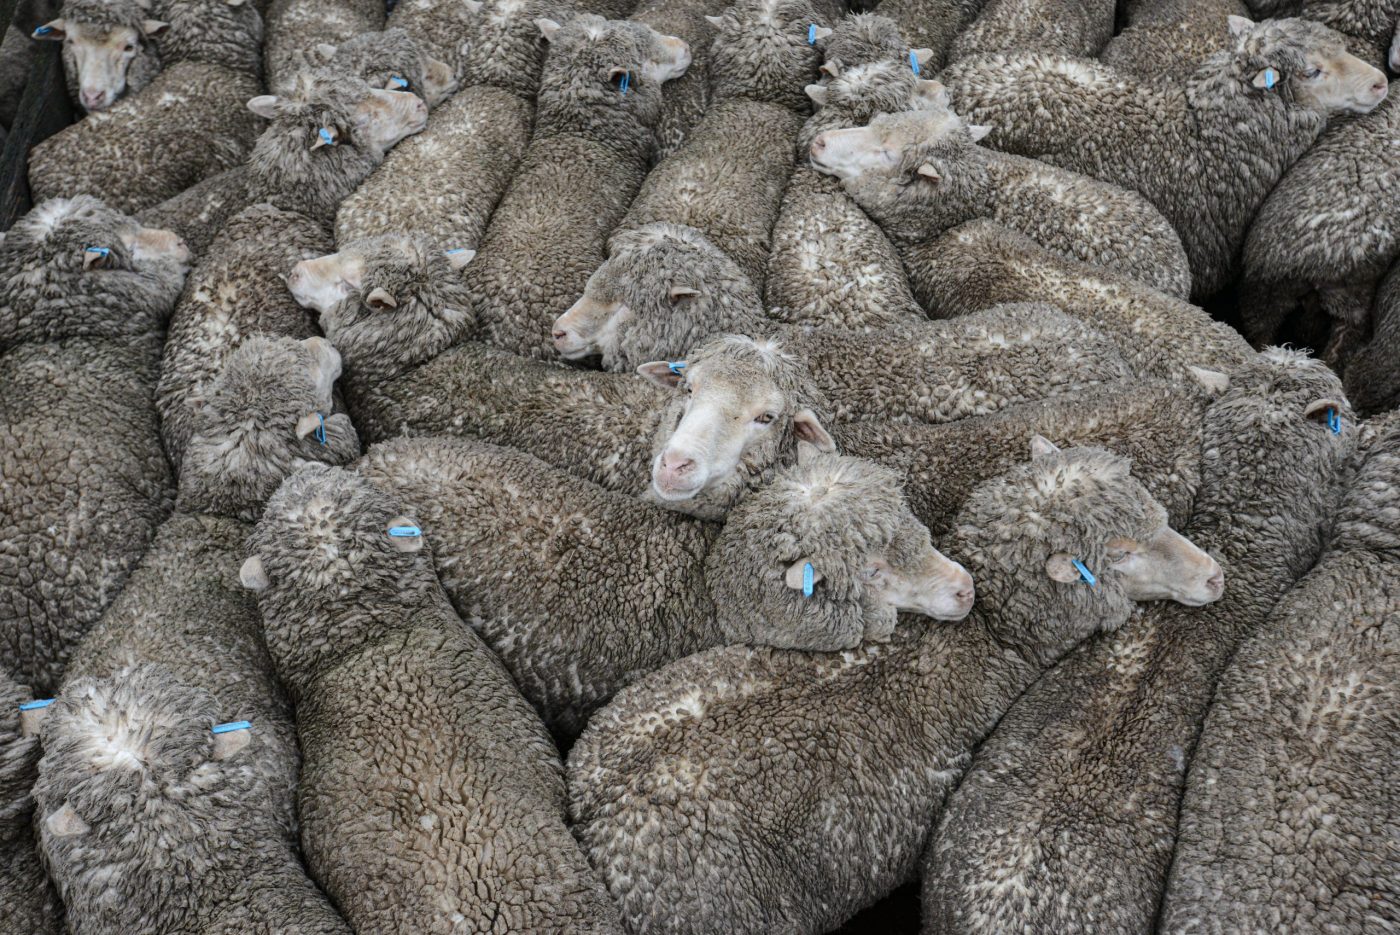 Tightly packed sheep at the sale yards. Australia, 2013.